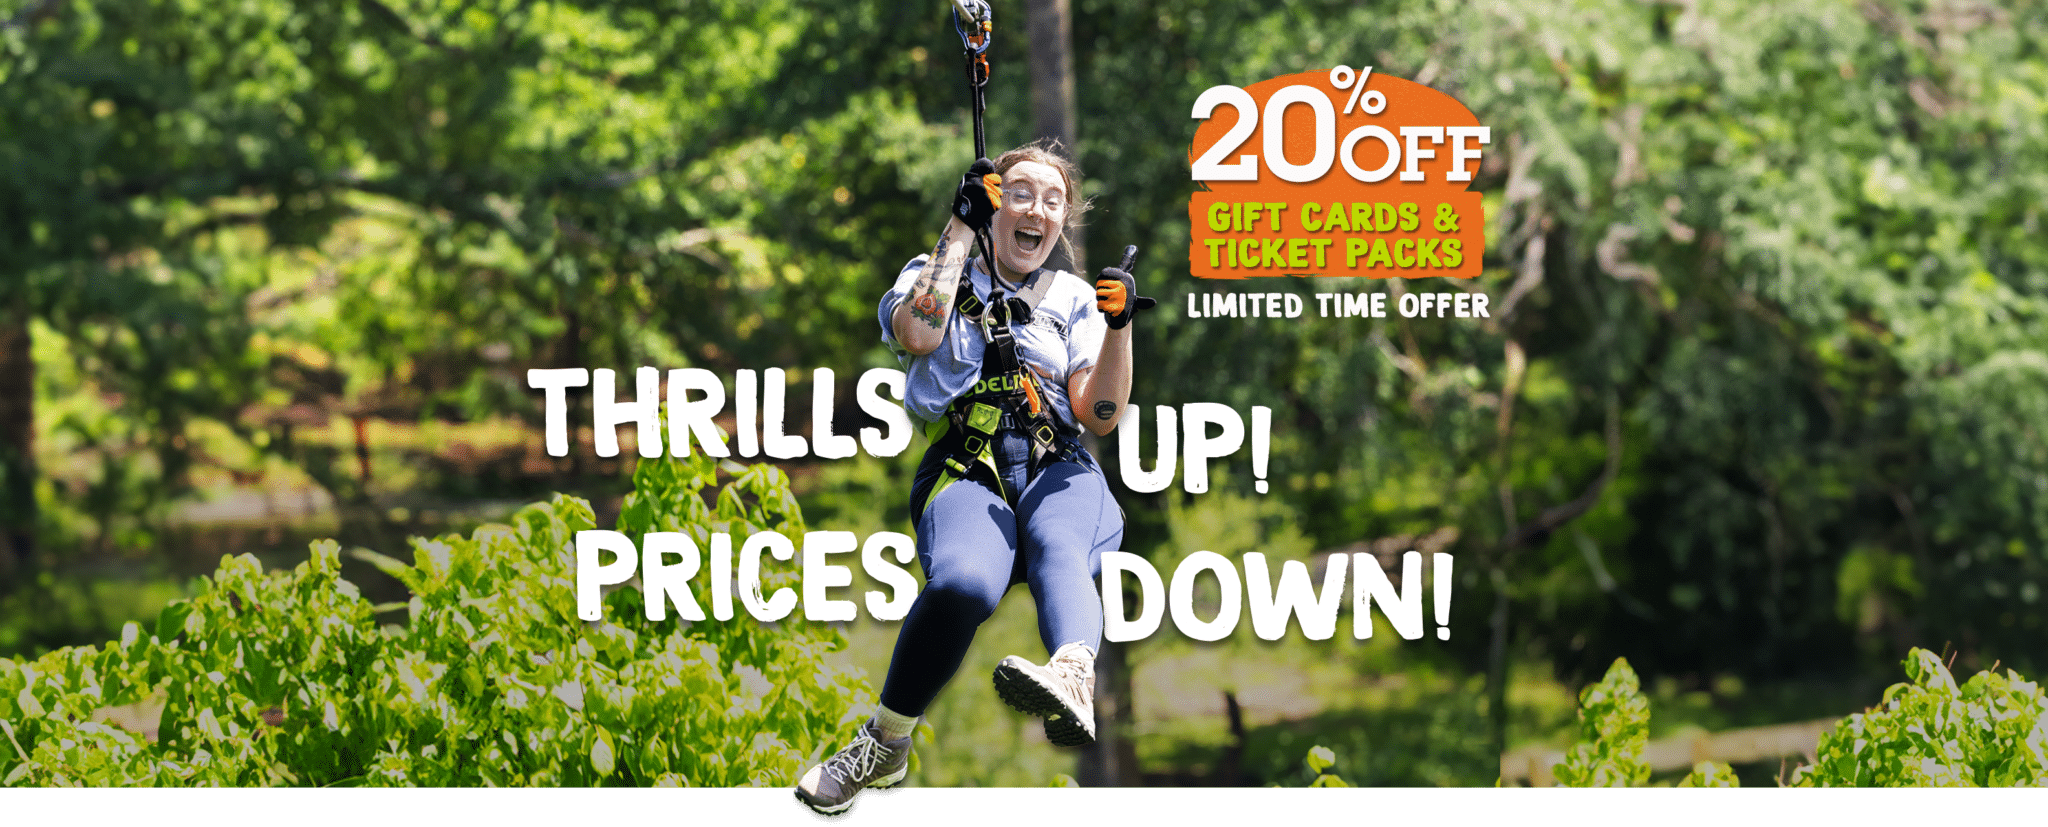 20% OFF Go Ape Gift Cards and Ticket Packs - Memorial Day Sale